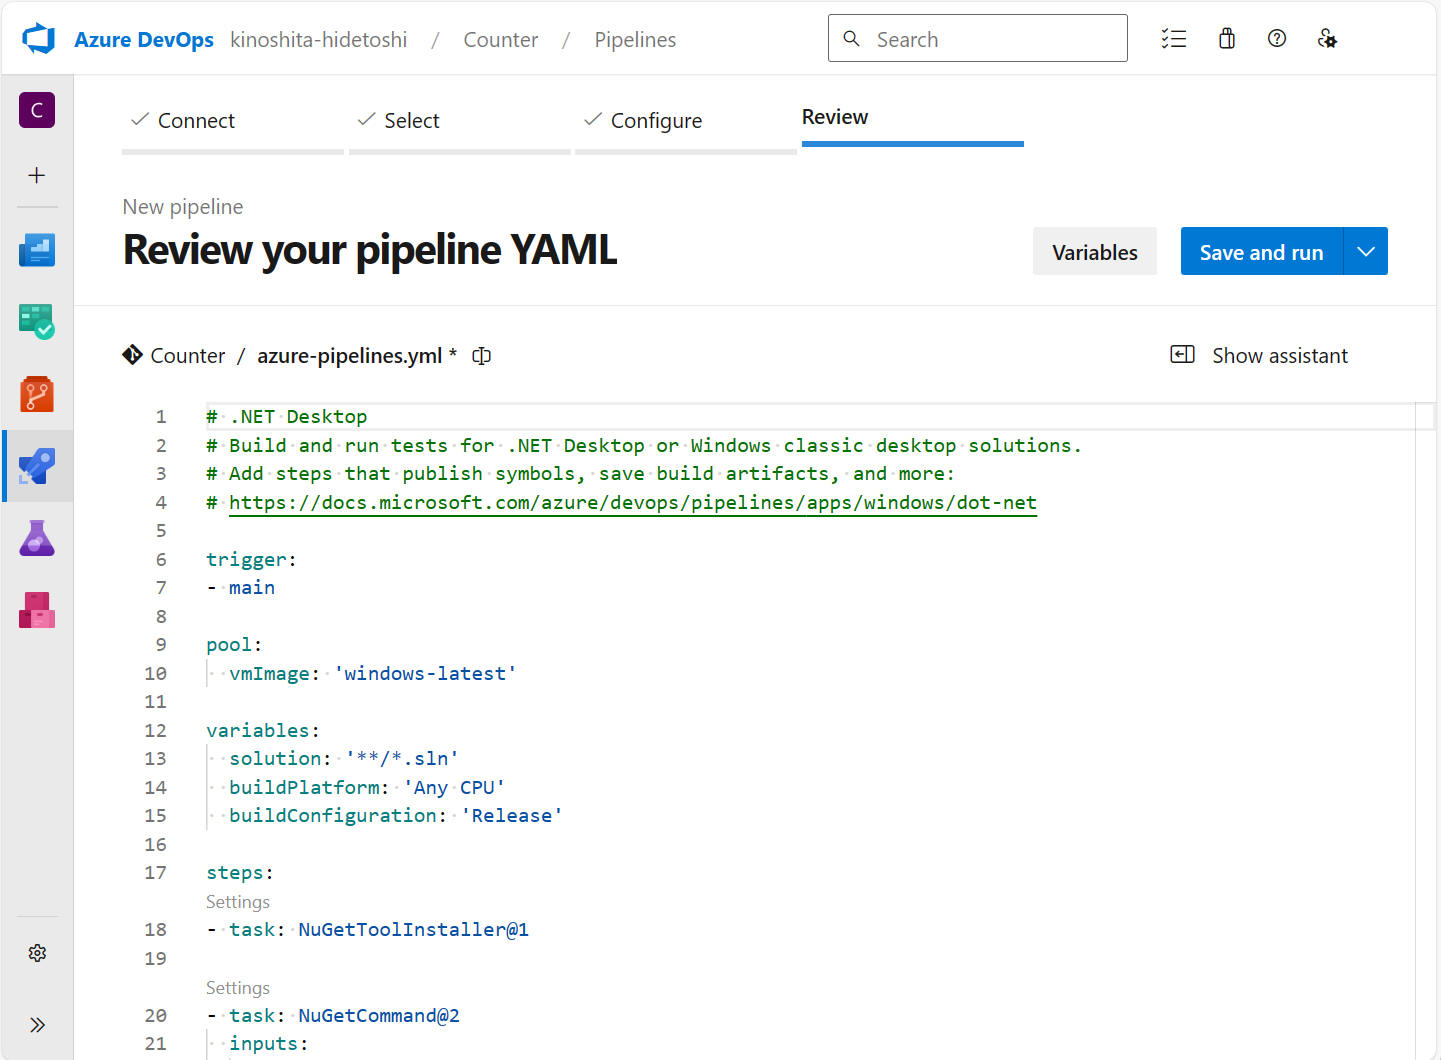 Review your pipeline YAML